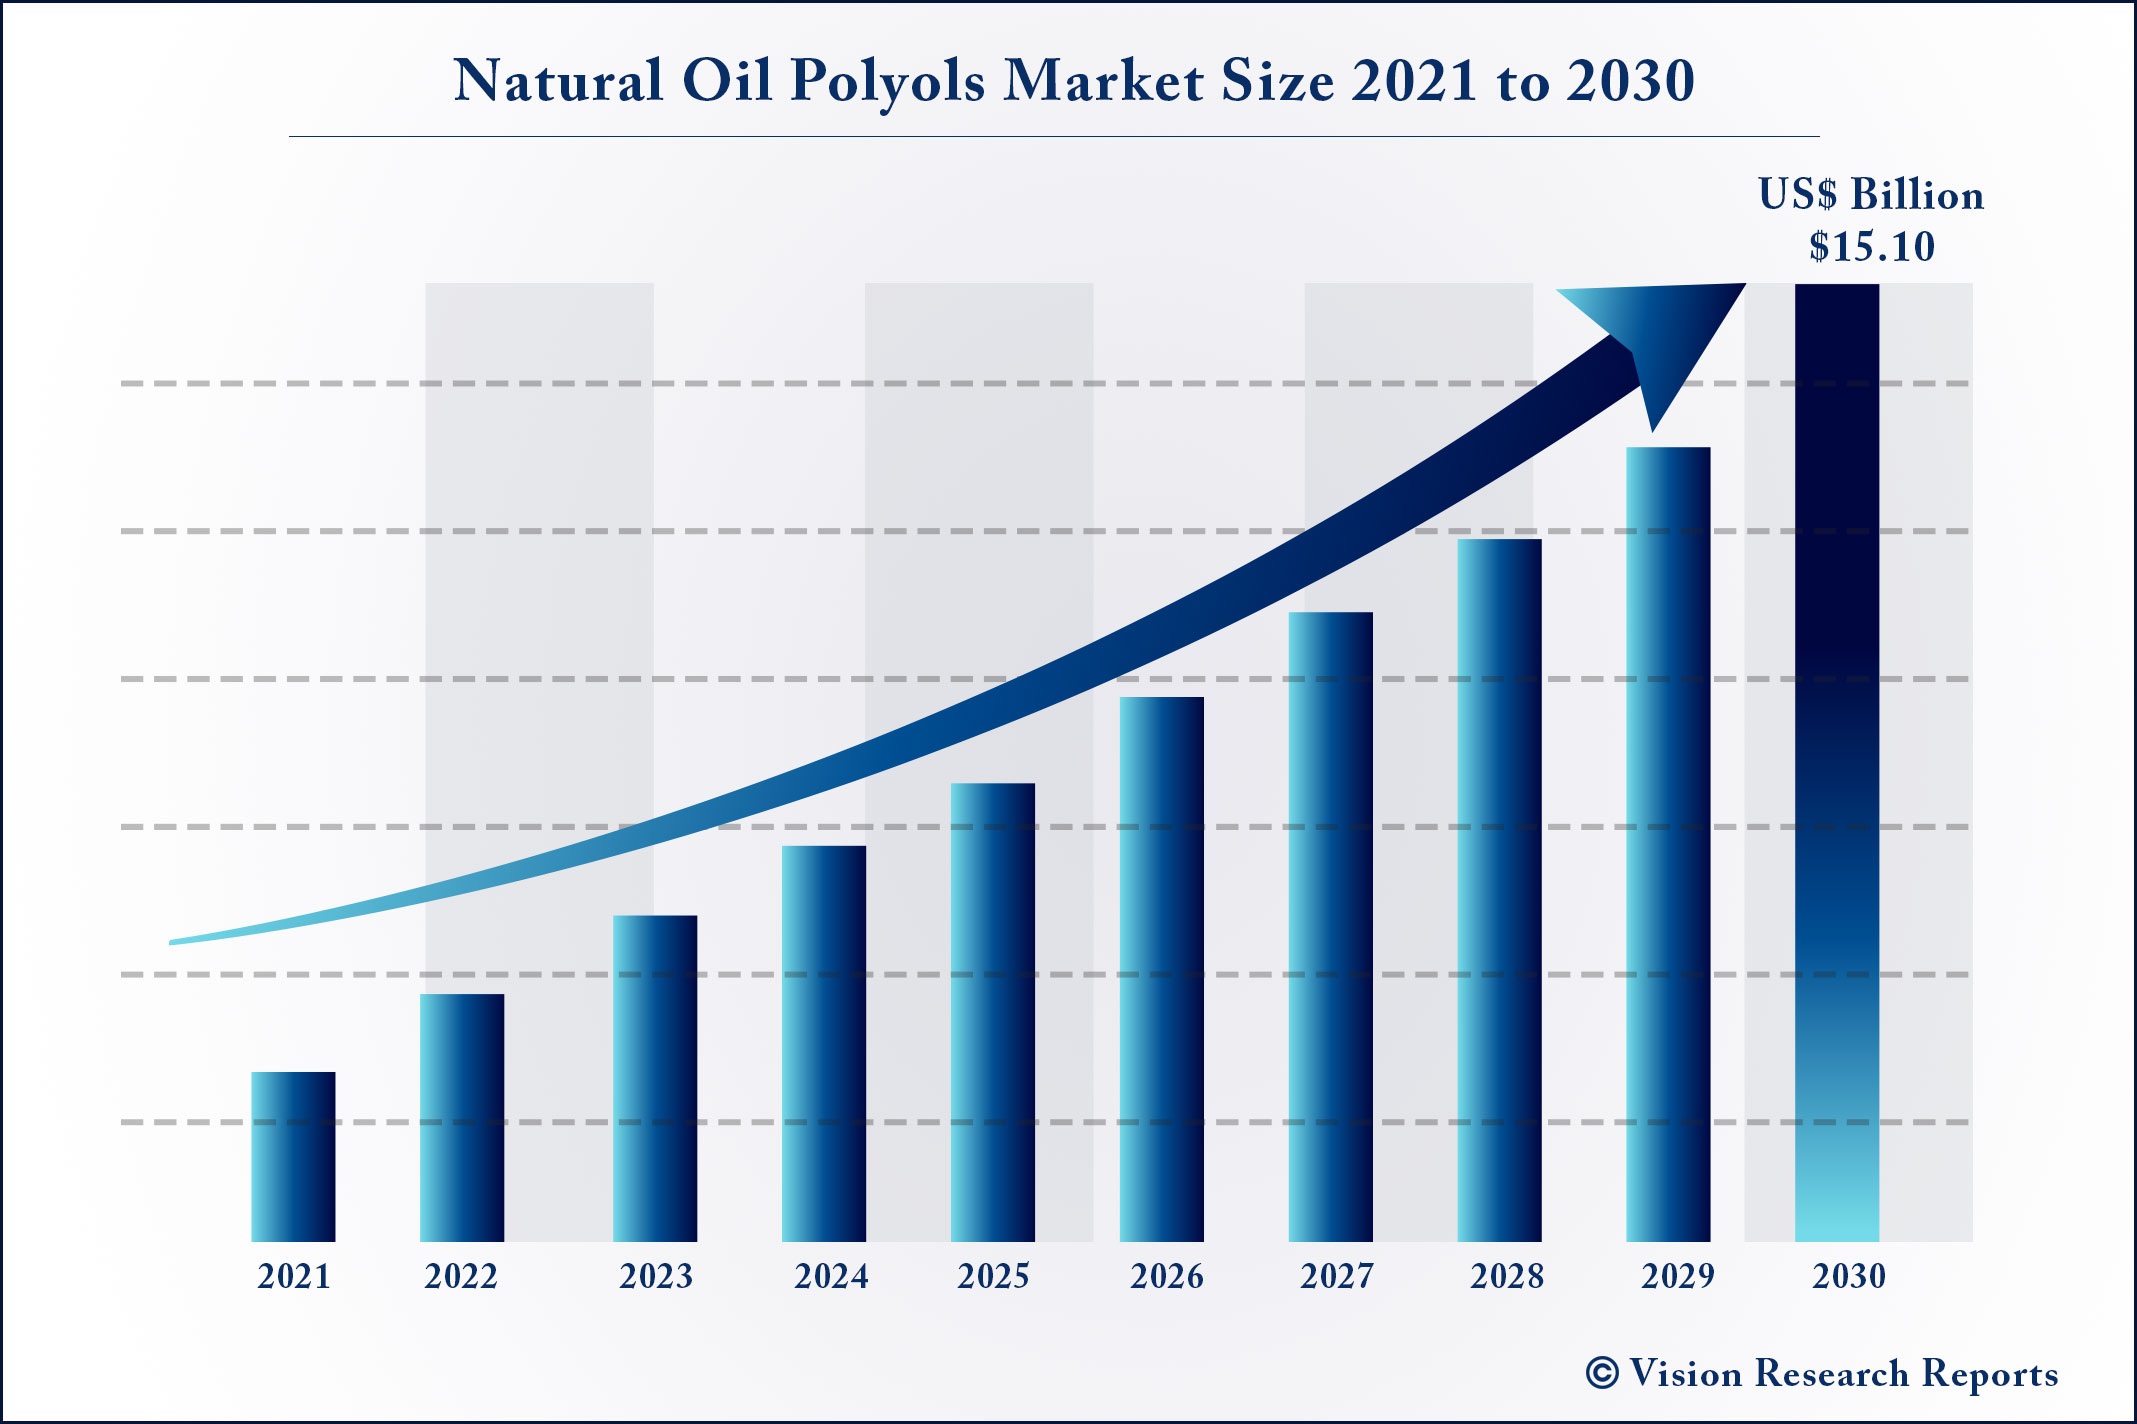 Natural Oil Polyols Market Size 2021 to 2030